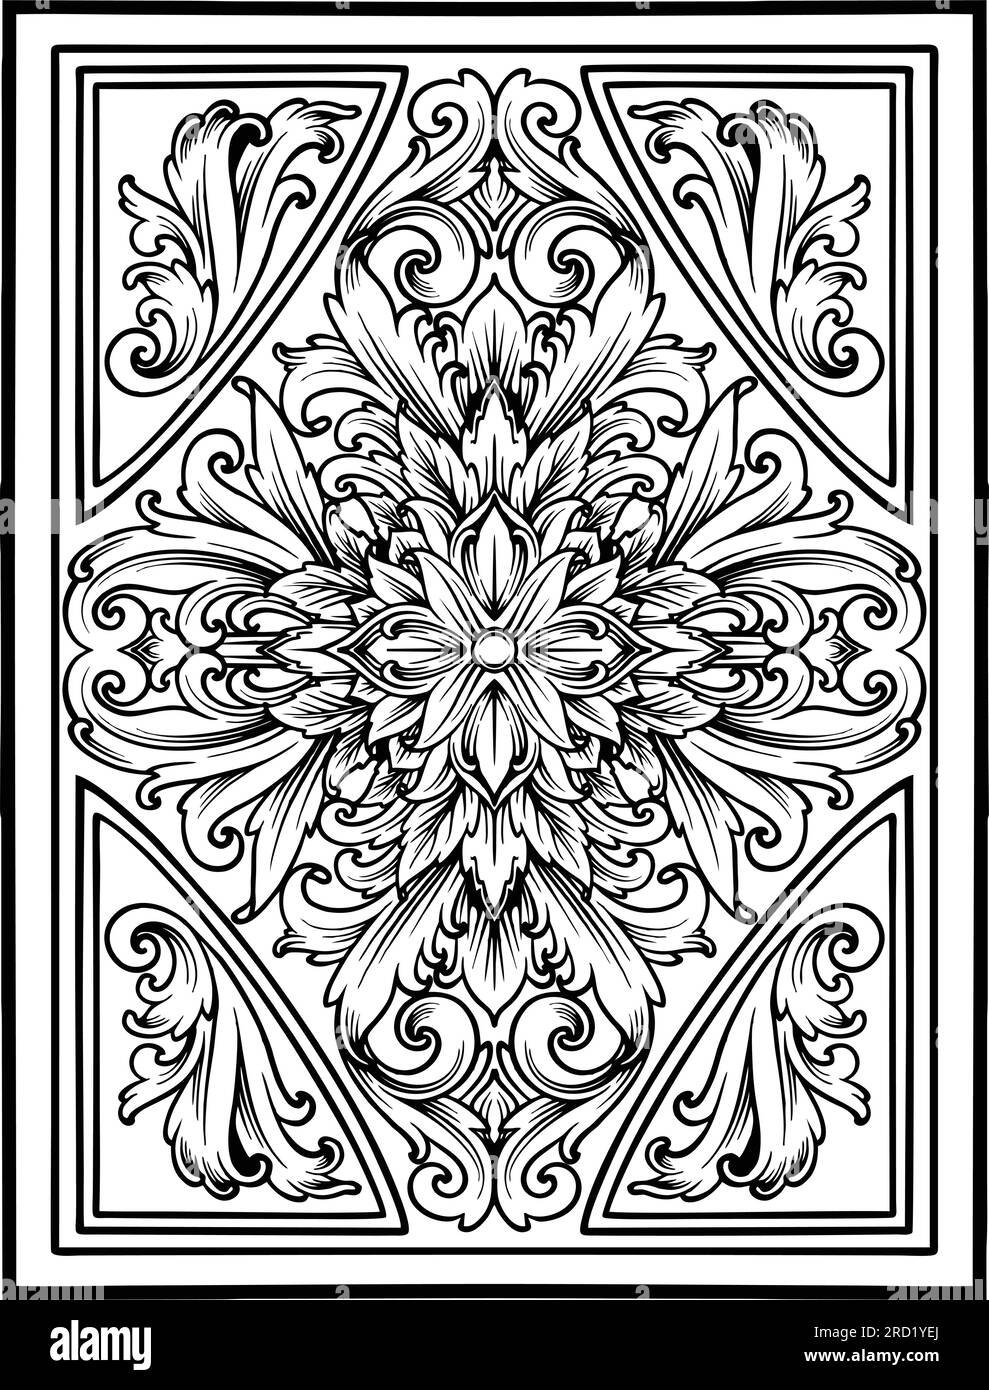 Engraved ornament art vintage card deck inspiration outline vector illustrations for your work logo, merchandise t-shirt, stickers and label designs, Stock Vector